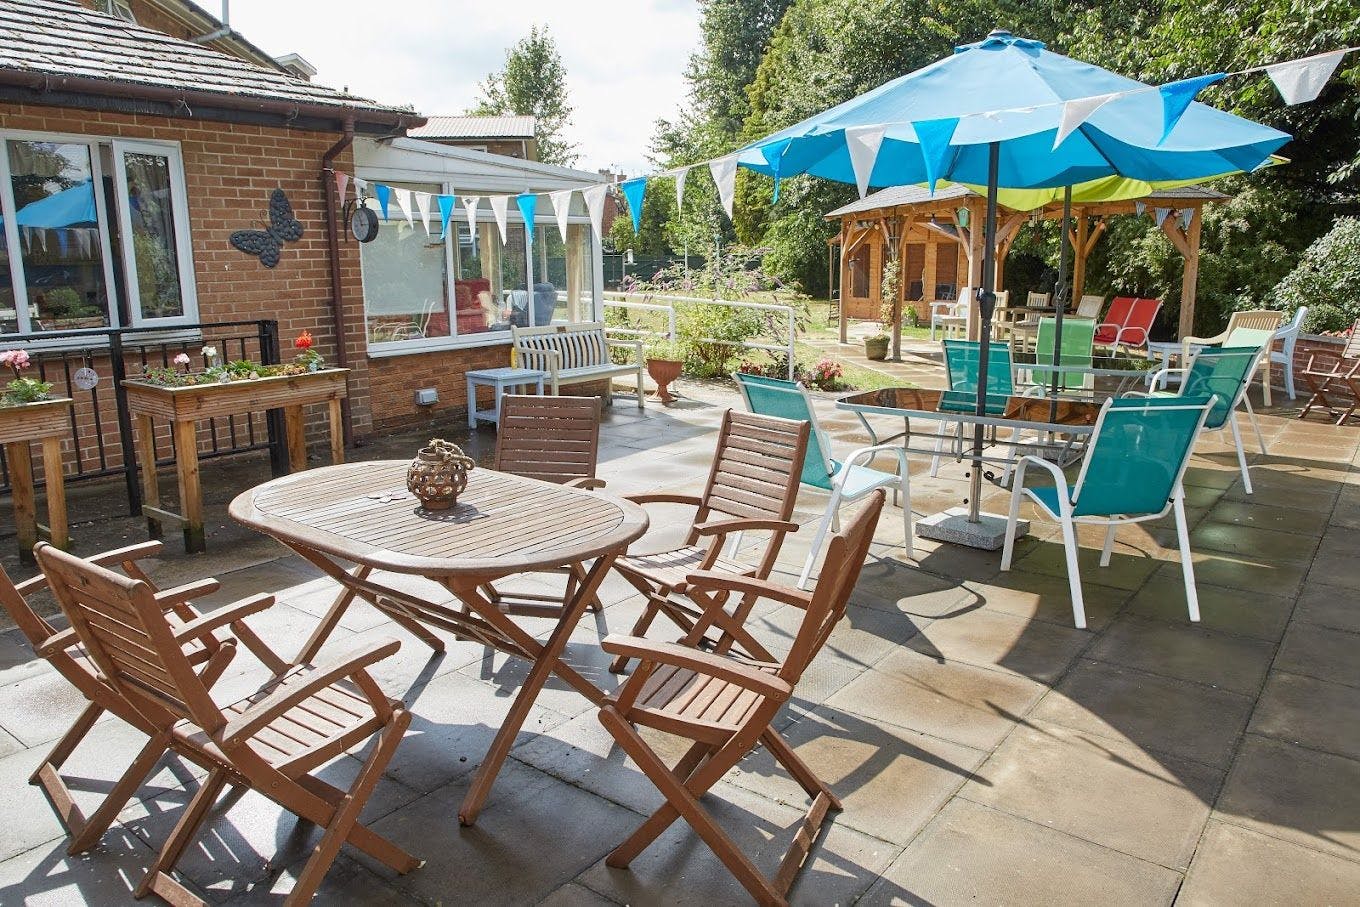 Garden at Gregory House Care Home in Grantham, Lincolnshire